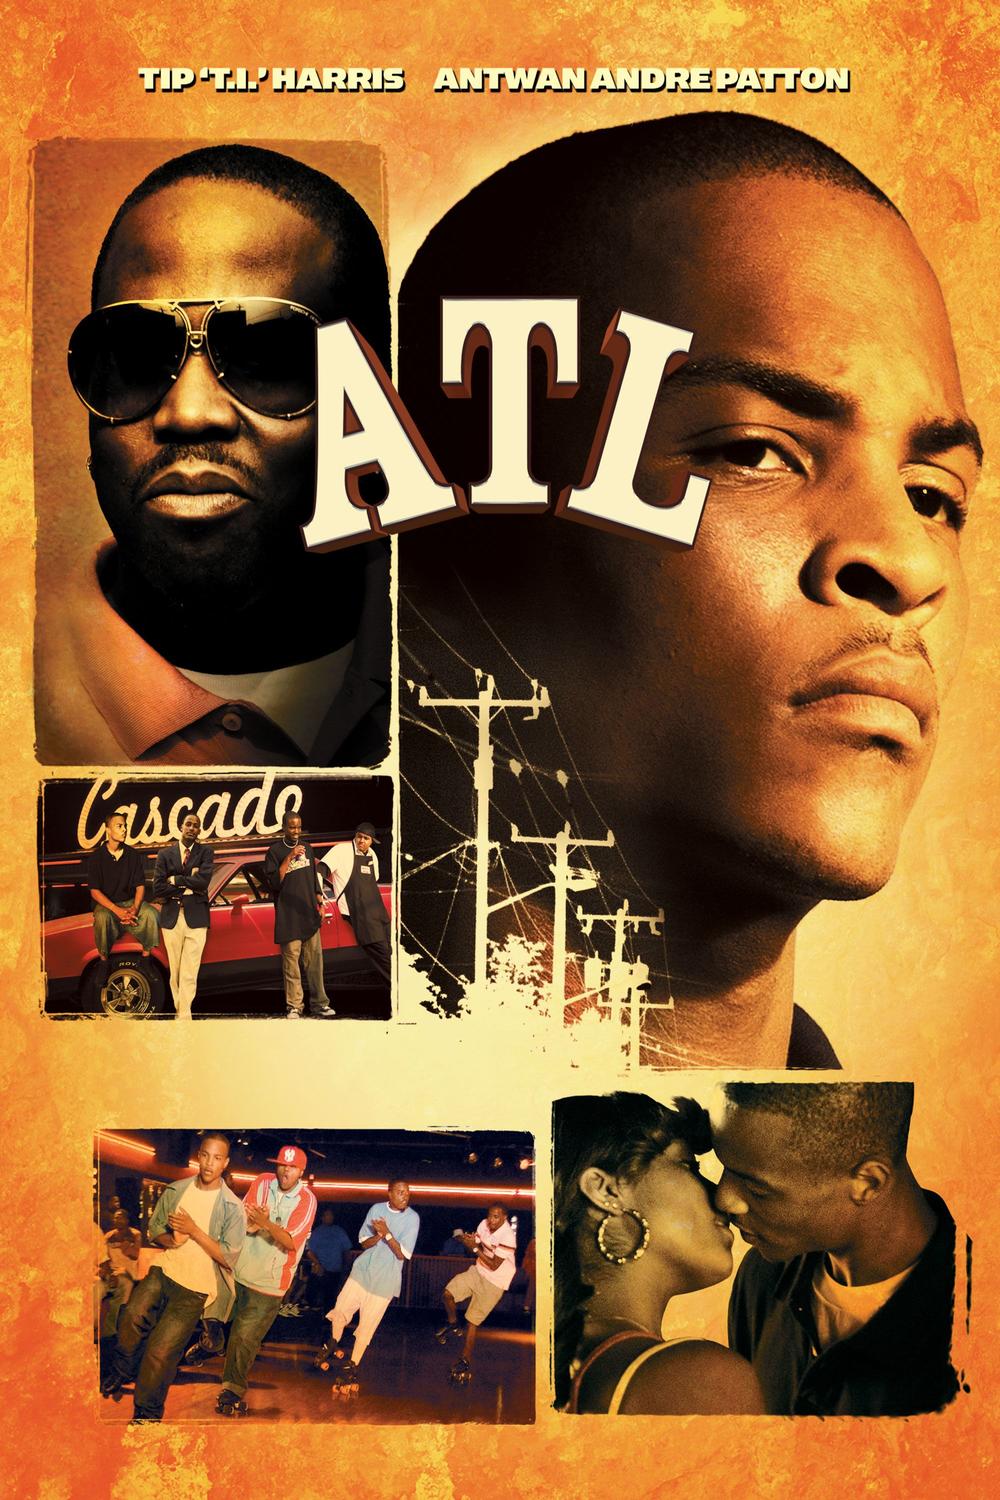 ATL is a 2006 comedy-drama film directed by Chris Robinson and starring Tip 'T.I.' Harris and . The screenplay was written by Tina Gordon Chism from an original story by Antwone Fisher, based on the experiences of the film's producers Dallas Austin and Tionne "T-Boz" Watkins. It stars Tip 'T.I.' Harris and Antwan ‘Big Boi’ Patton.